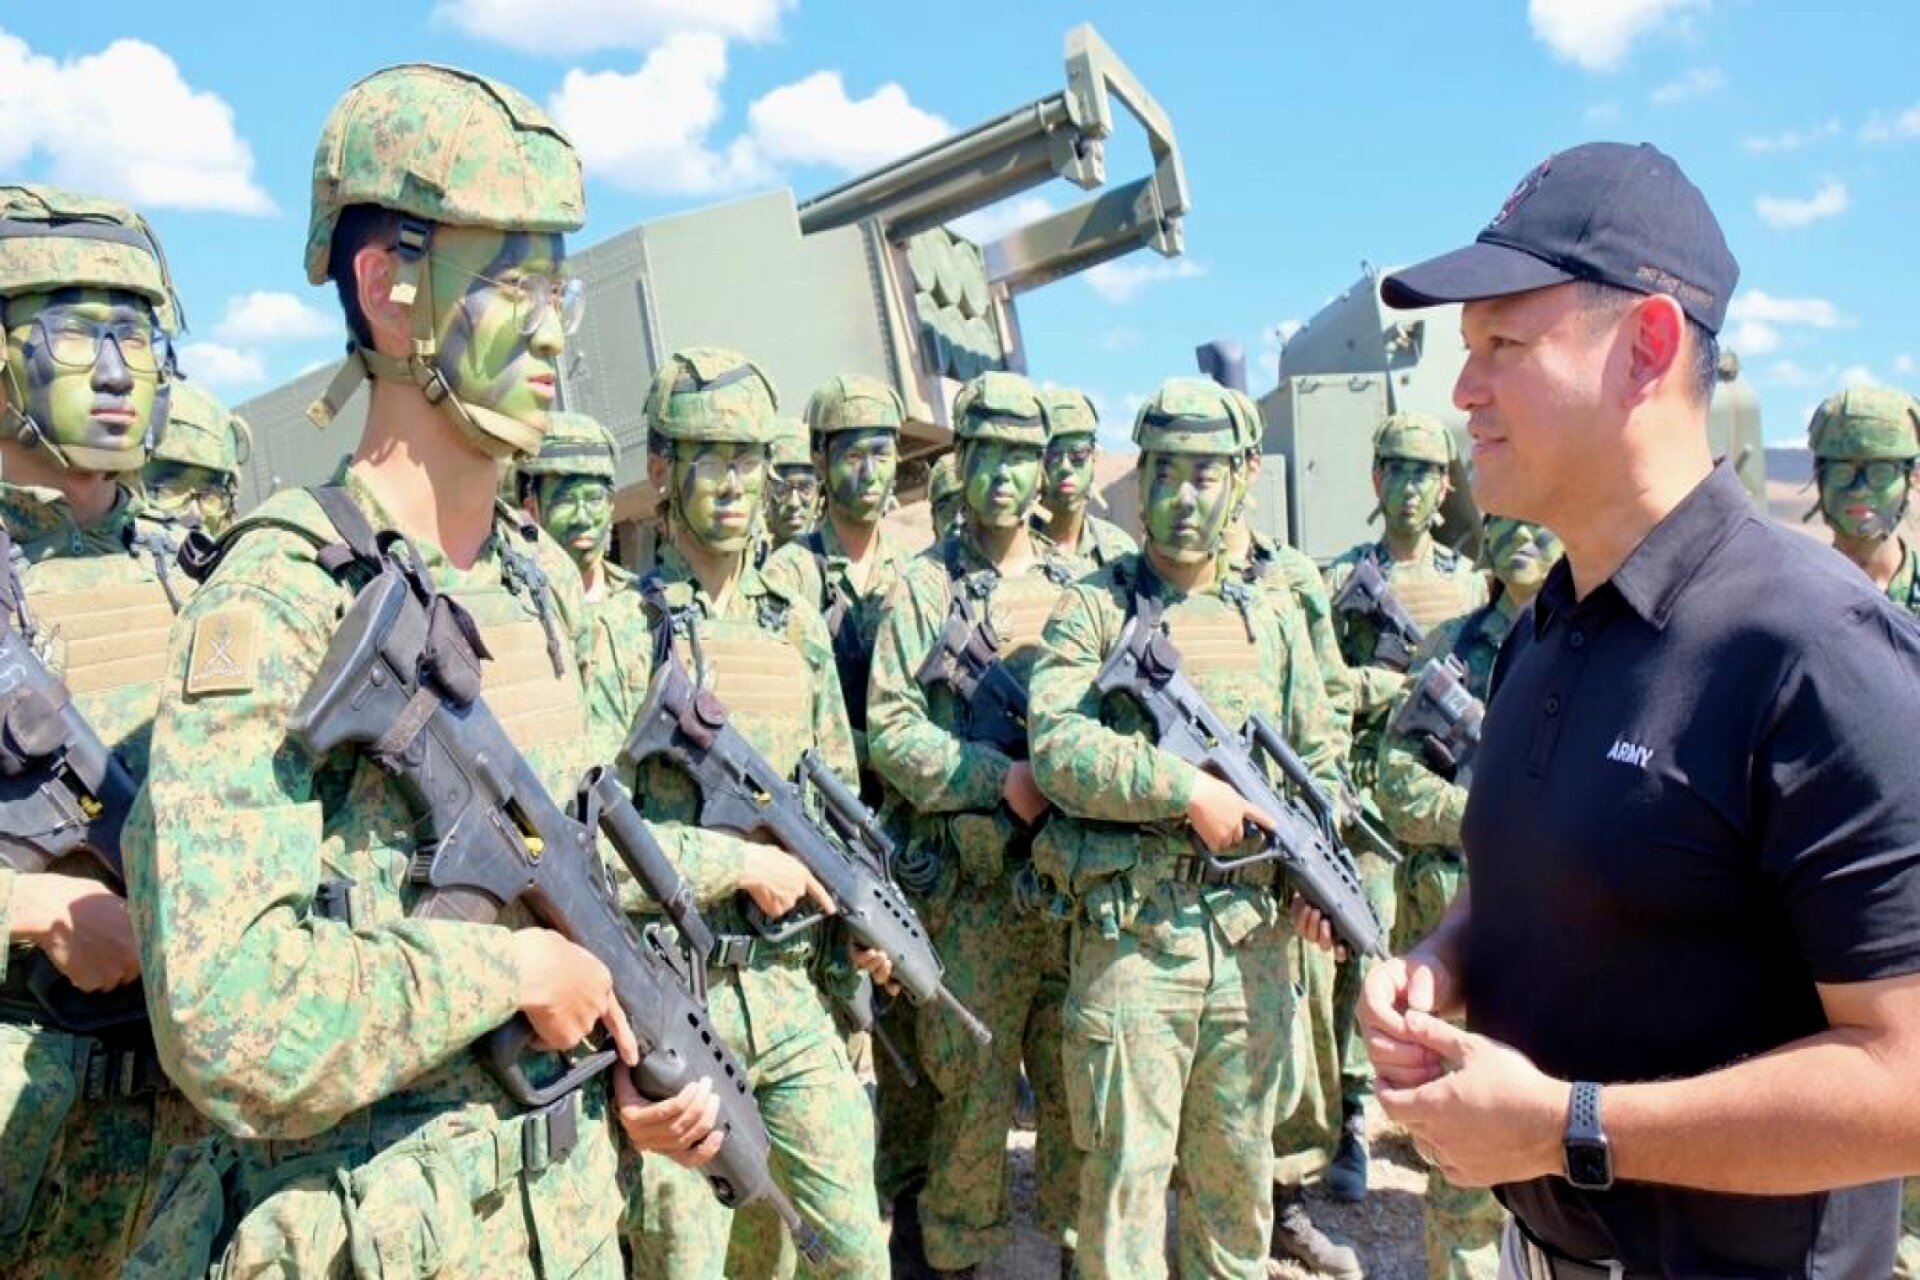 Senior Minister of State for Defence Mr Zaqy Mohamad engaging personnel from the Singapore Armed Forces (SAF) participating in Exercise Daring Warrior 2022 (XDW22).